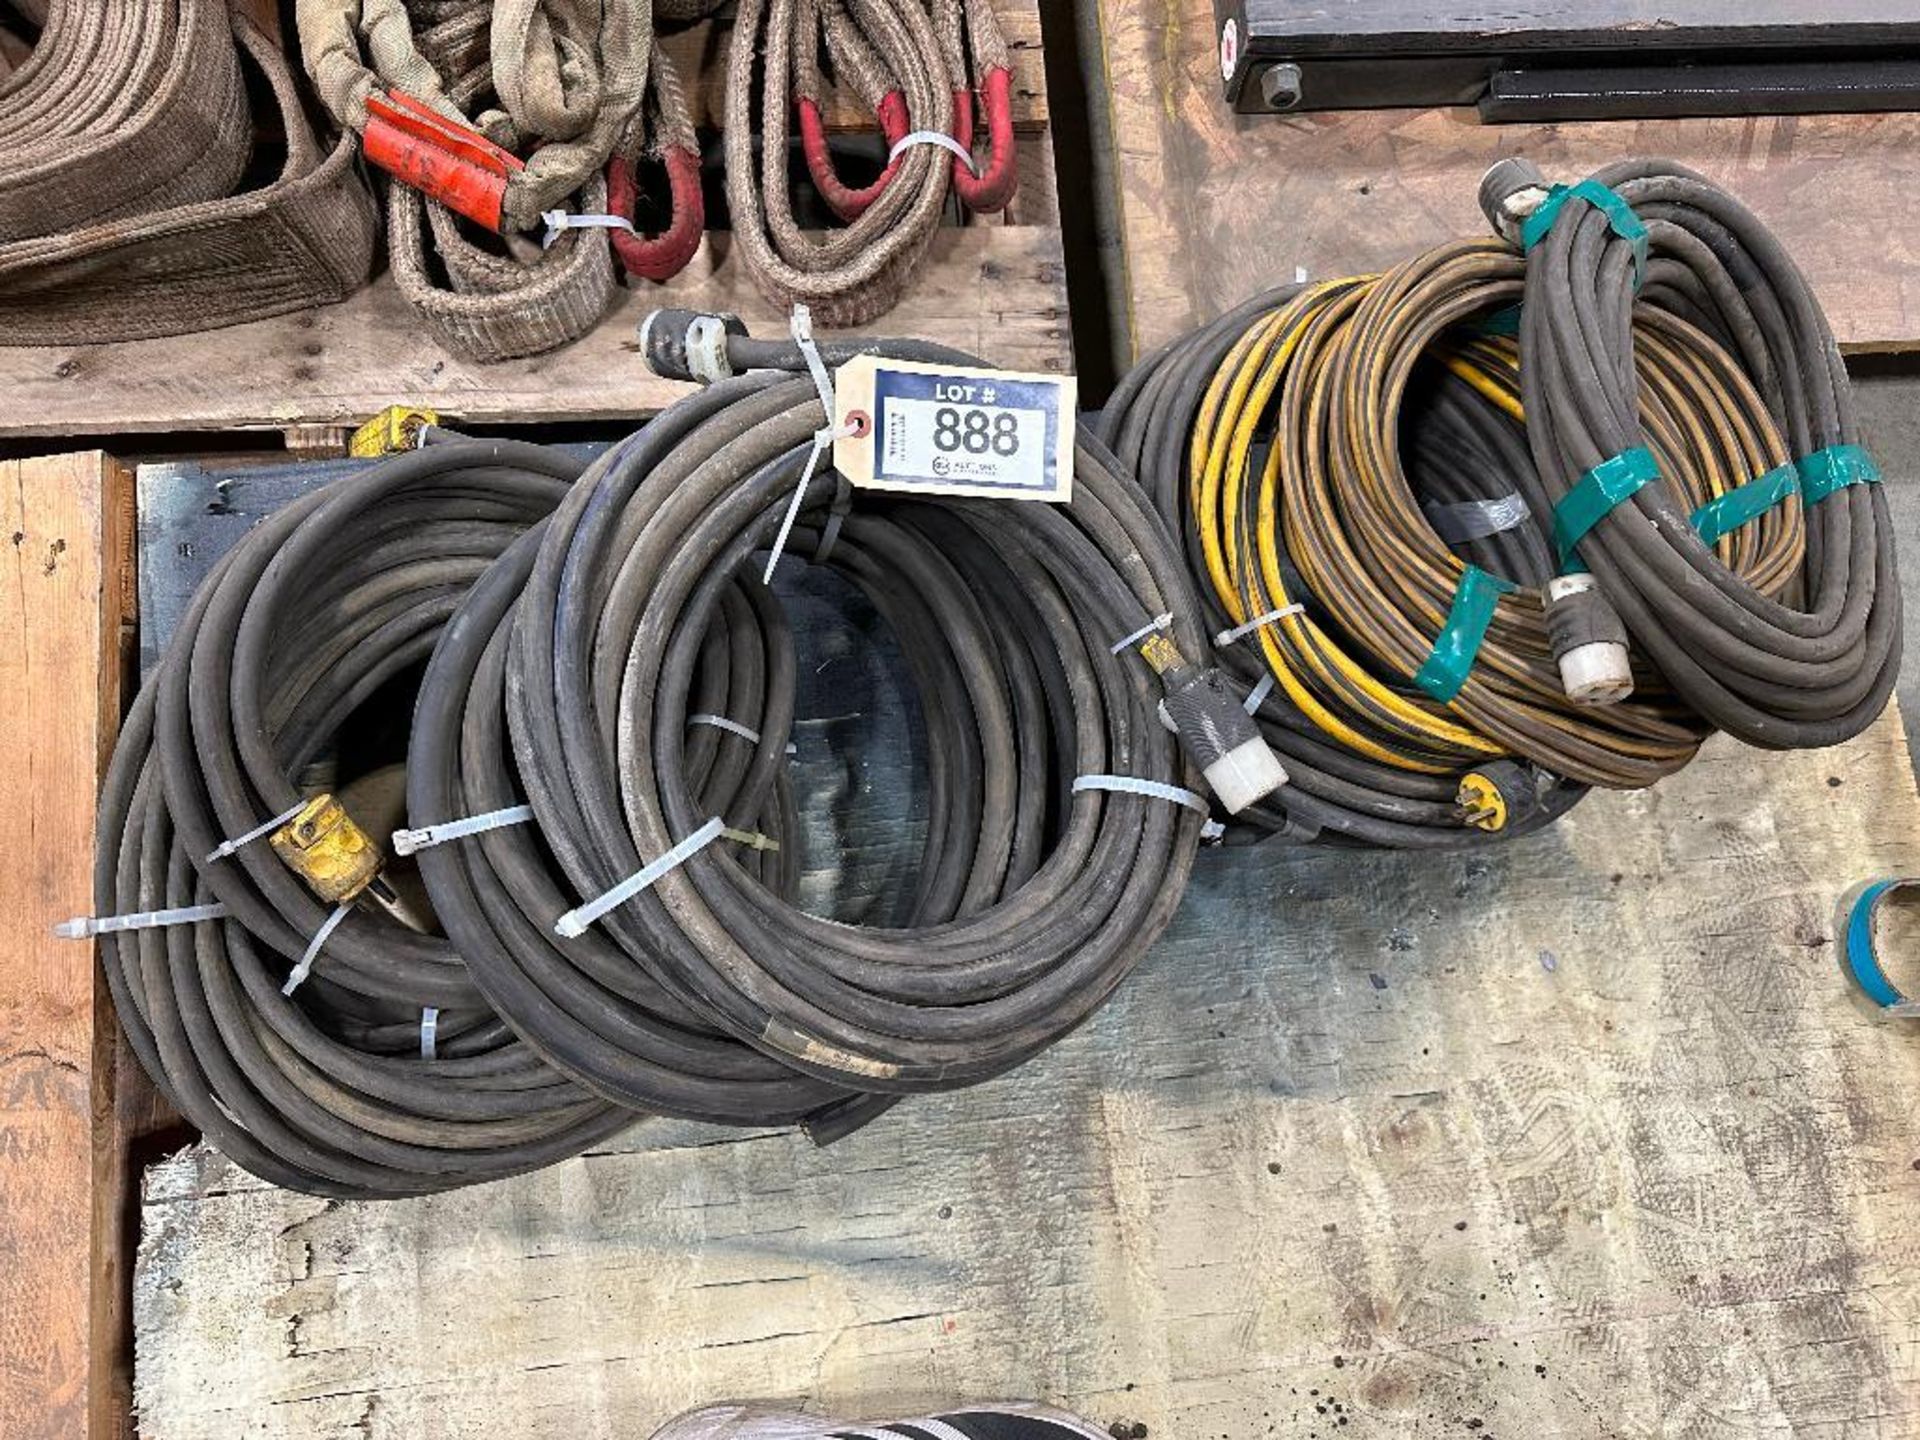 Lot of (6) Asst. Rolls of Asst. Electrical Cable - Image 2 of 3